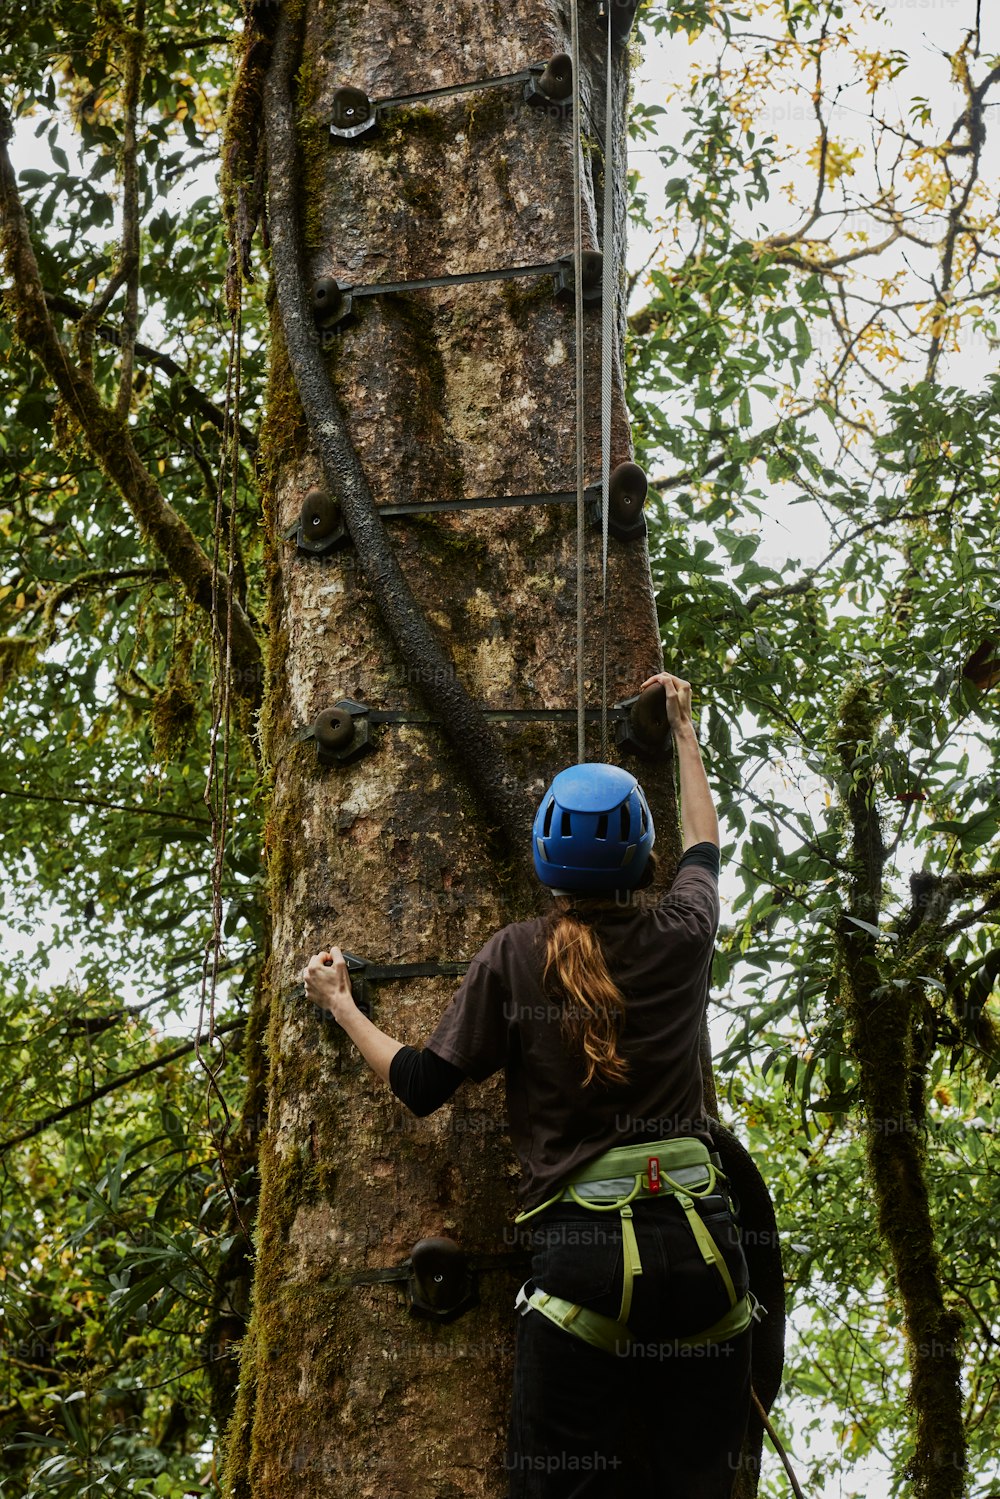 a person climbing up a tree in the forest